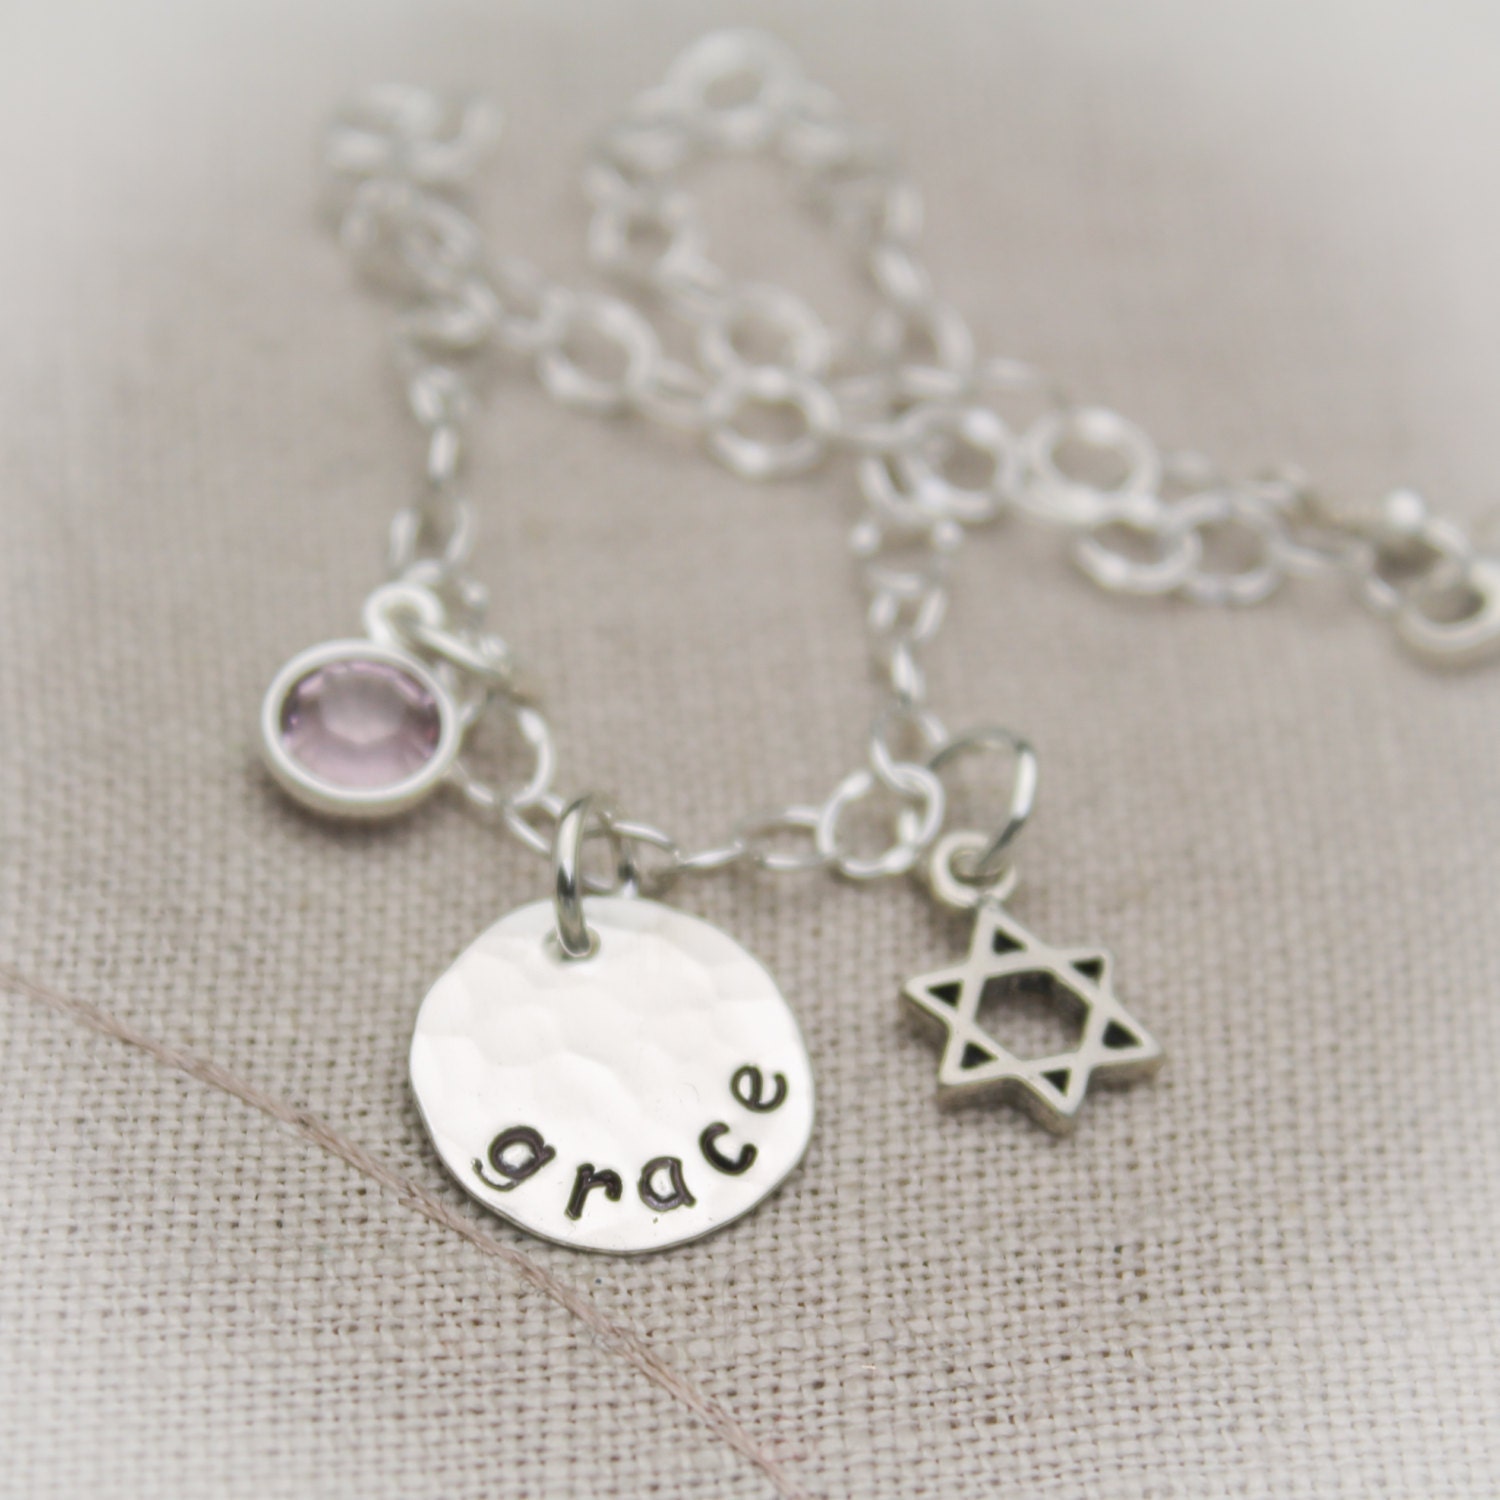 Bat Mitzvah Star of David Charm Bracelet with Birthstone Sterling Silver Personalized Hand Stamped